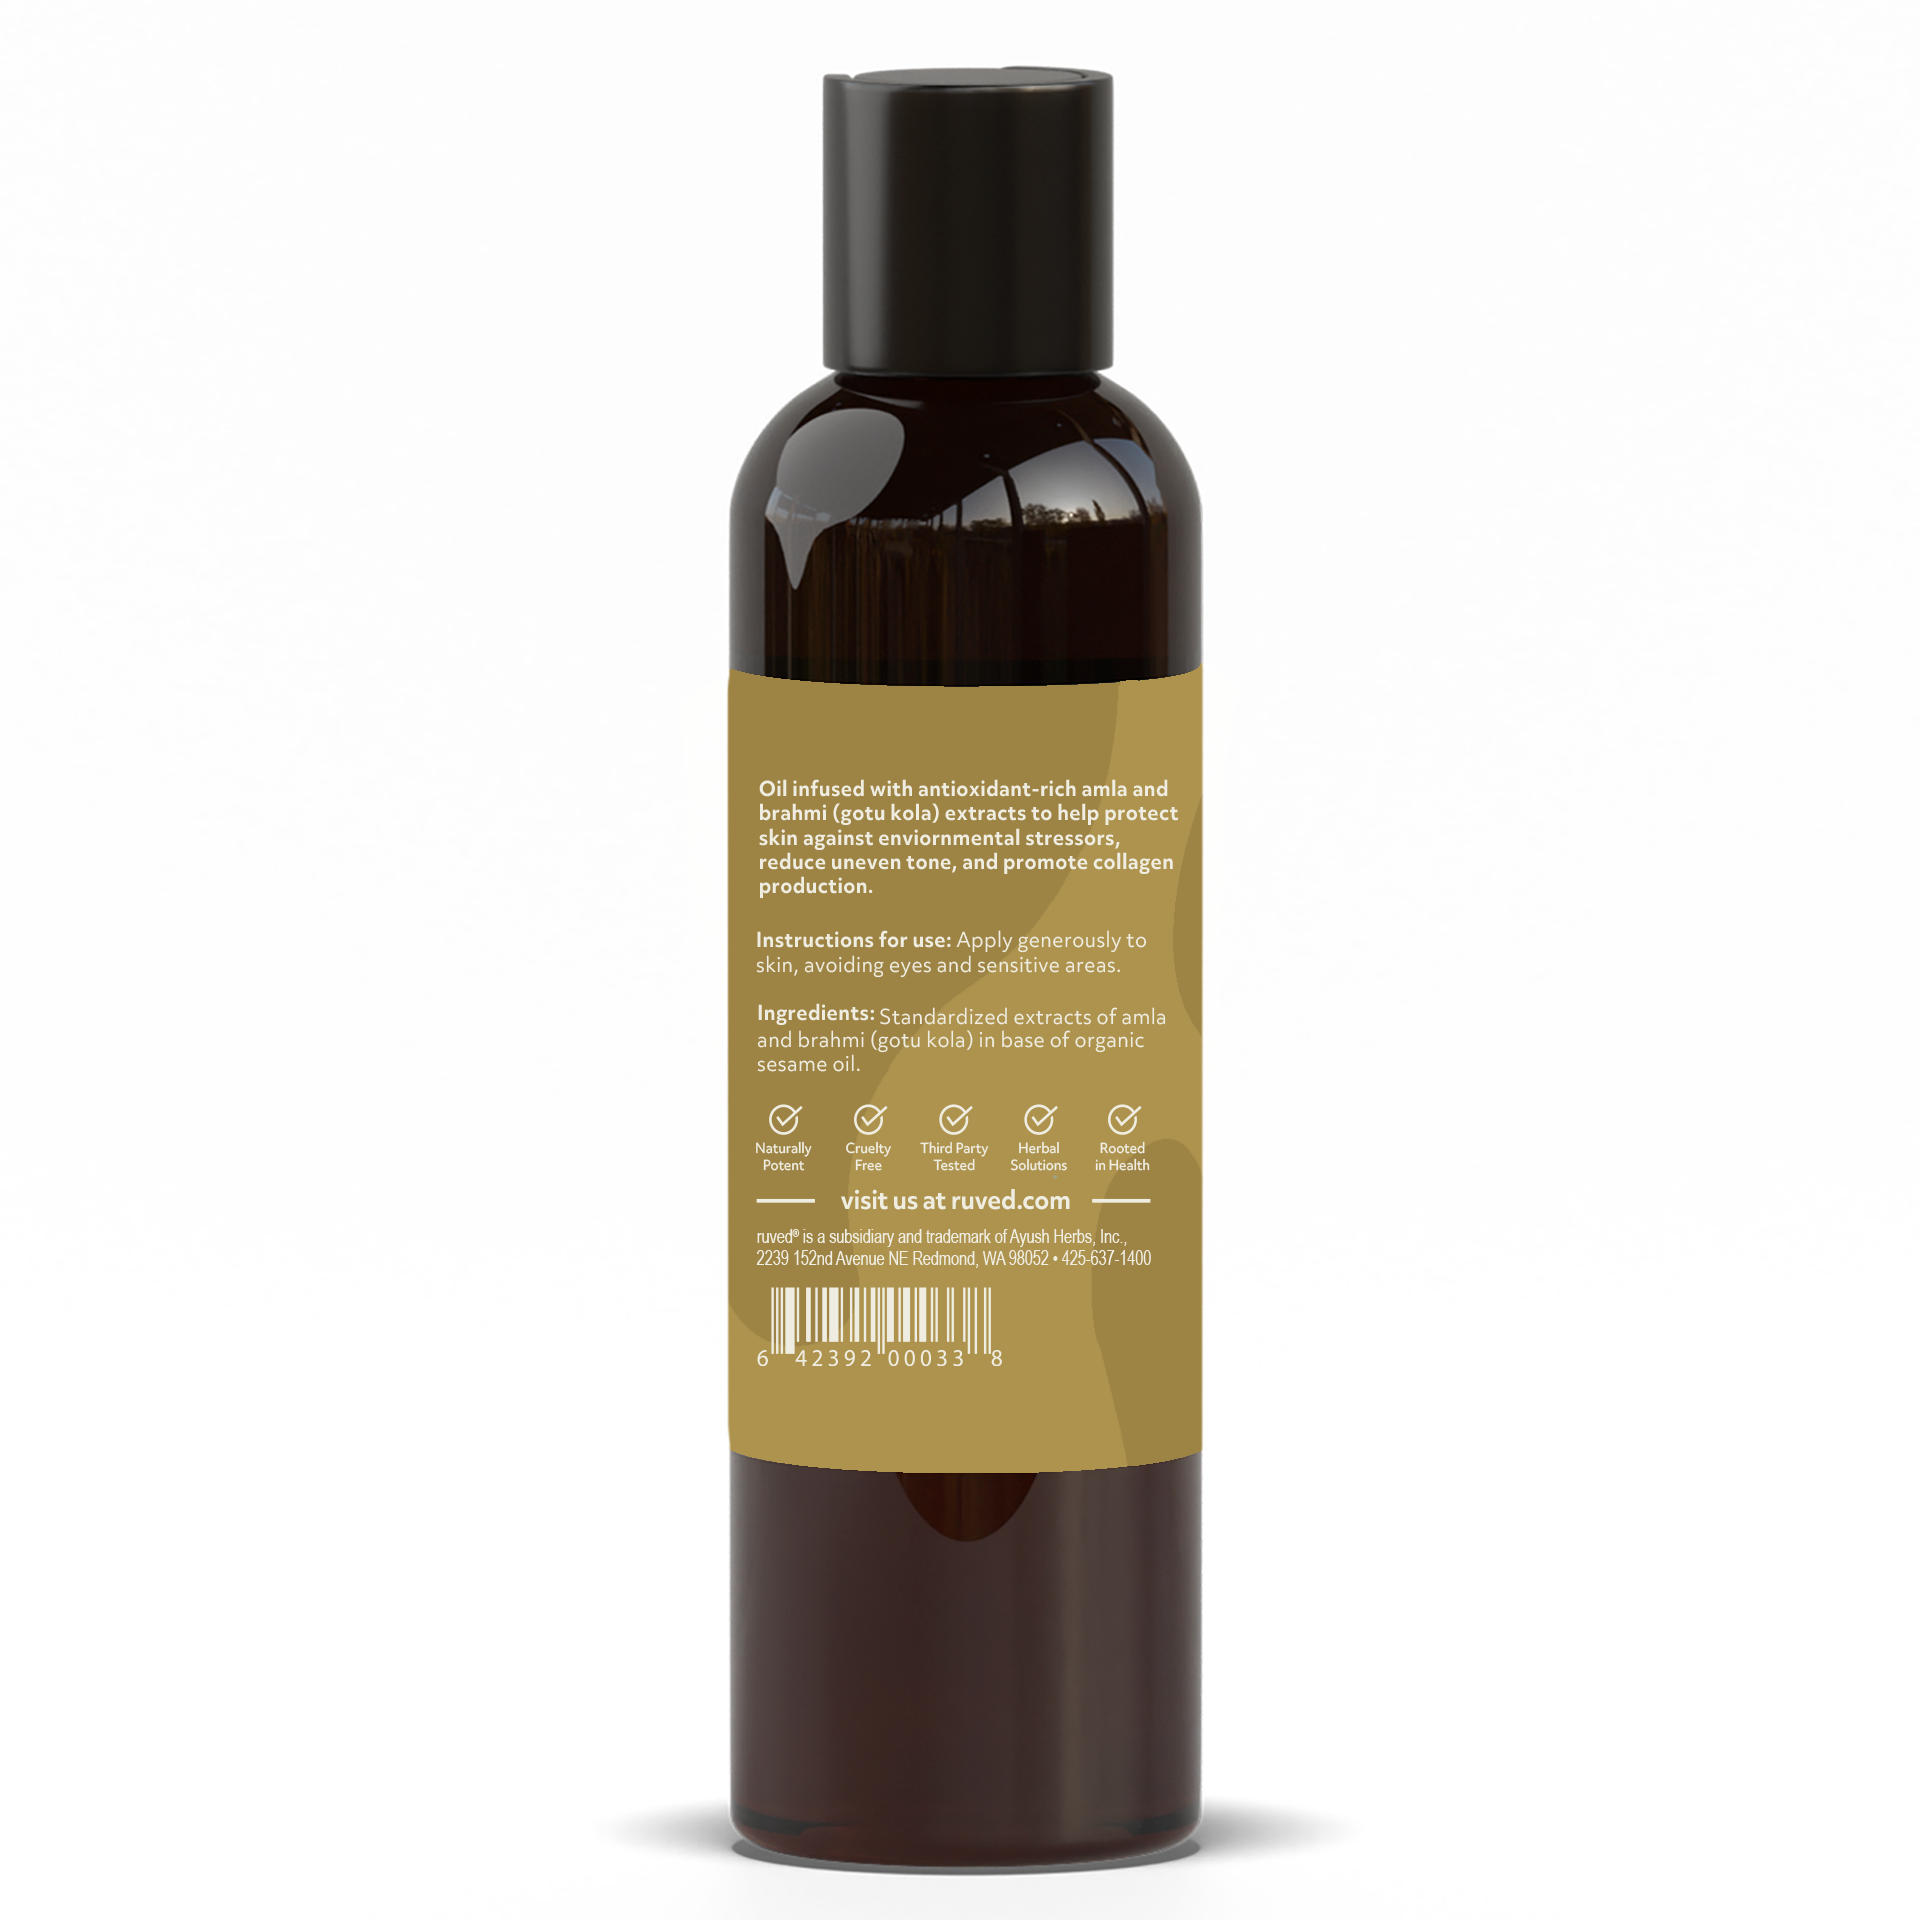 Healthy Aging Body Oil Supplement Facts Back Side - Luxurious blend of natural oils to nourish and rejuvenate skin, promoting a radiant, youthful appearance. 100ml Bottle.